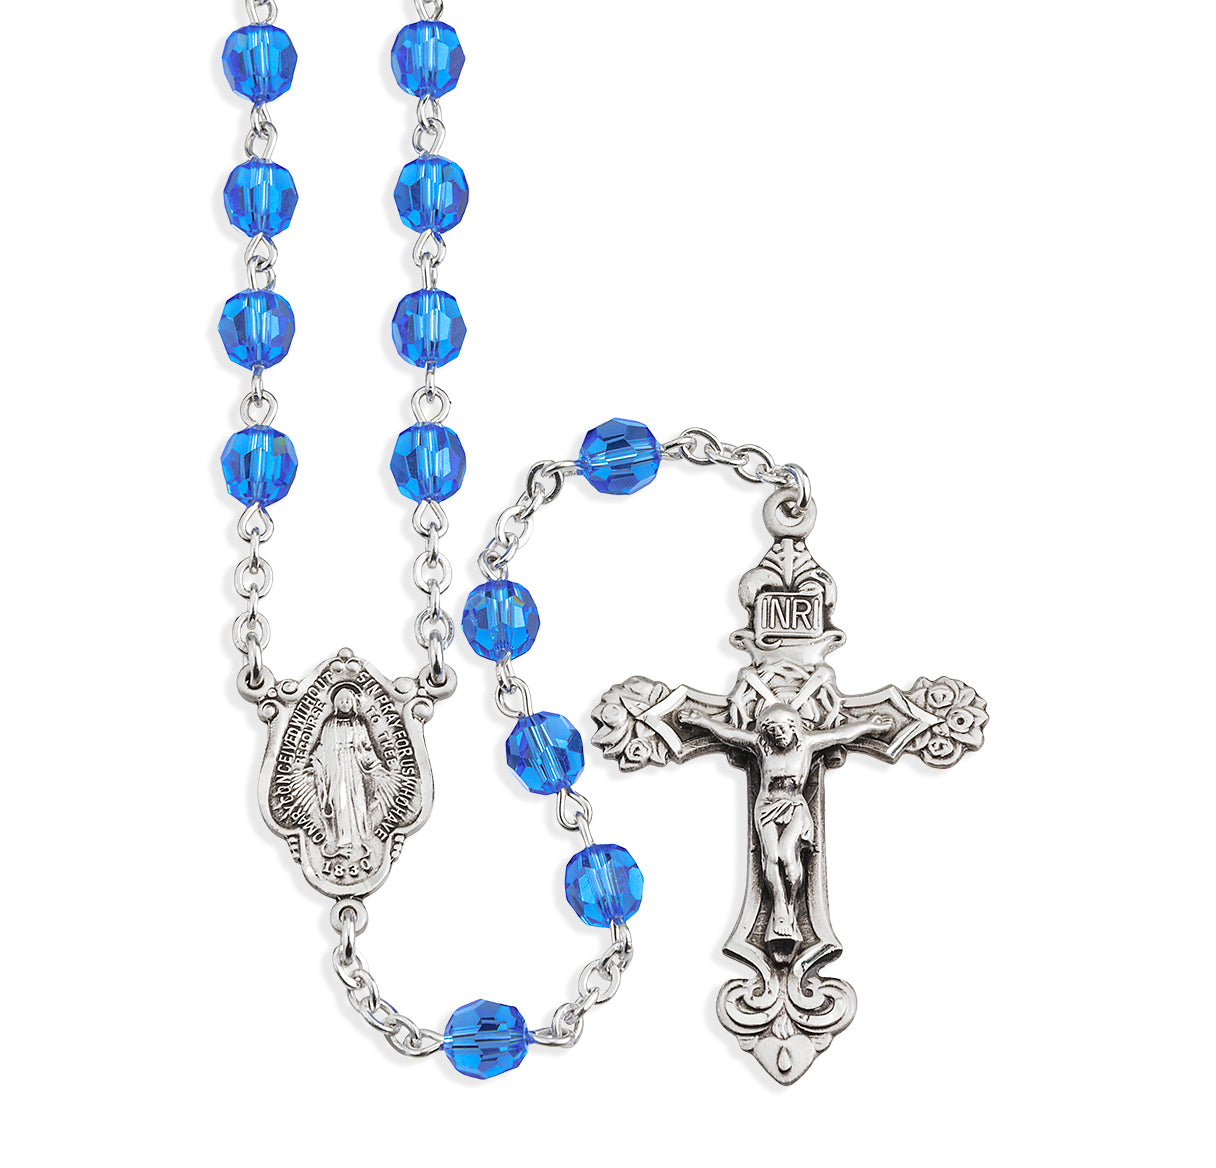 Sterling Silver Rosary Hand Made with Swarovski Crystal 6mm Sapphire Faceted Round Beads by HMH